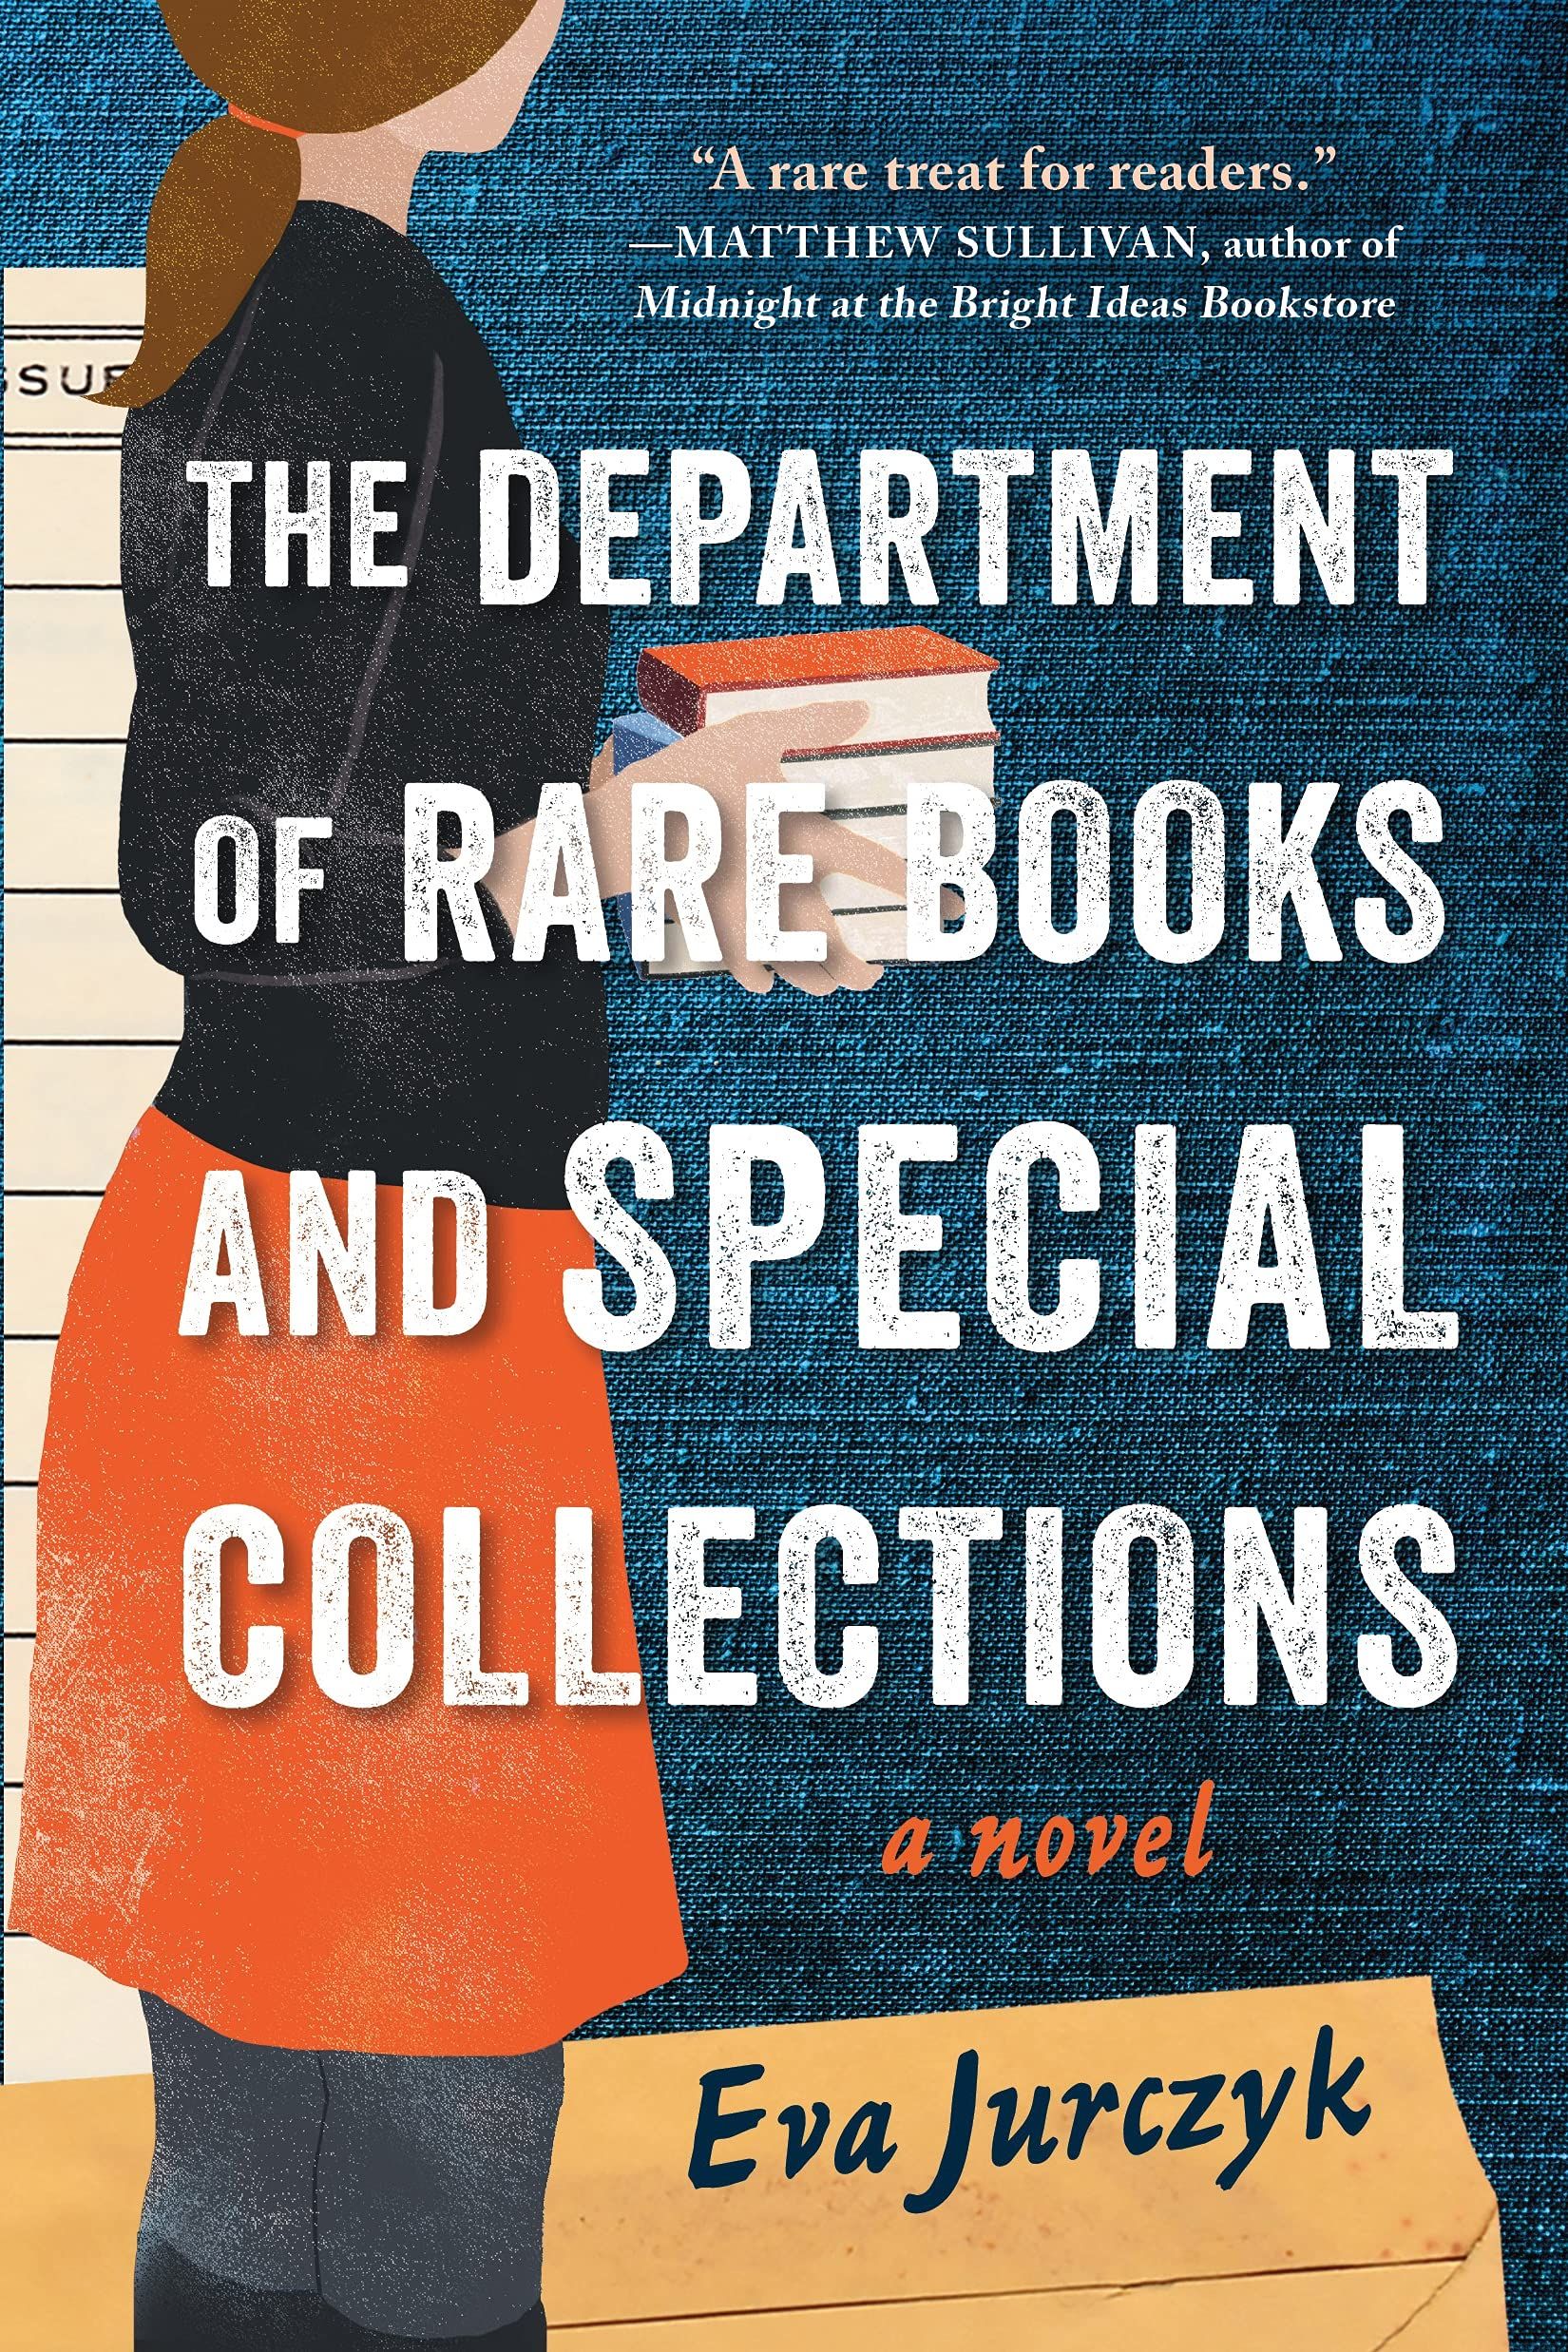 The Department of Rare Books and Special Collections : A Novel